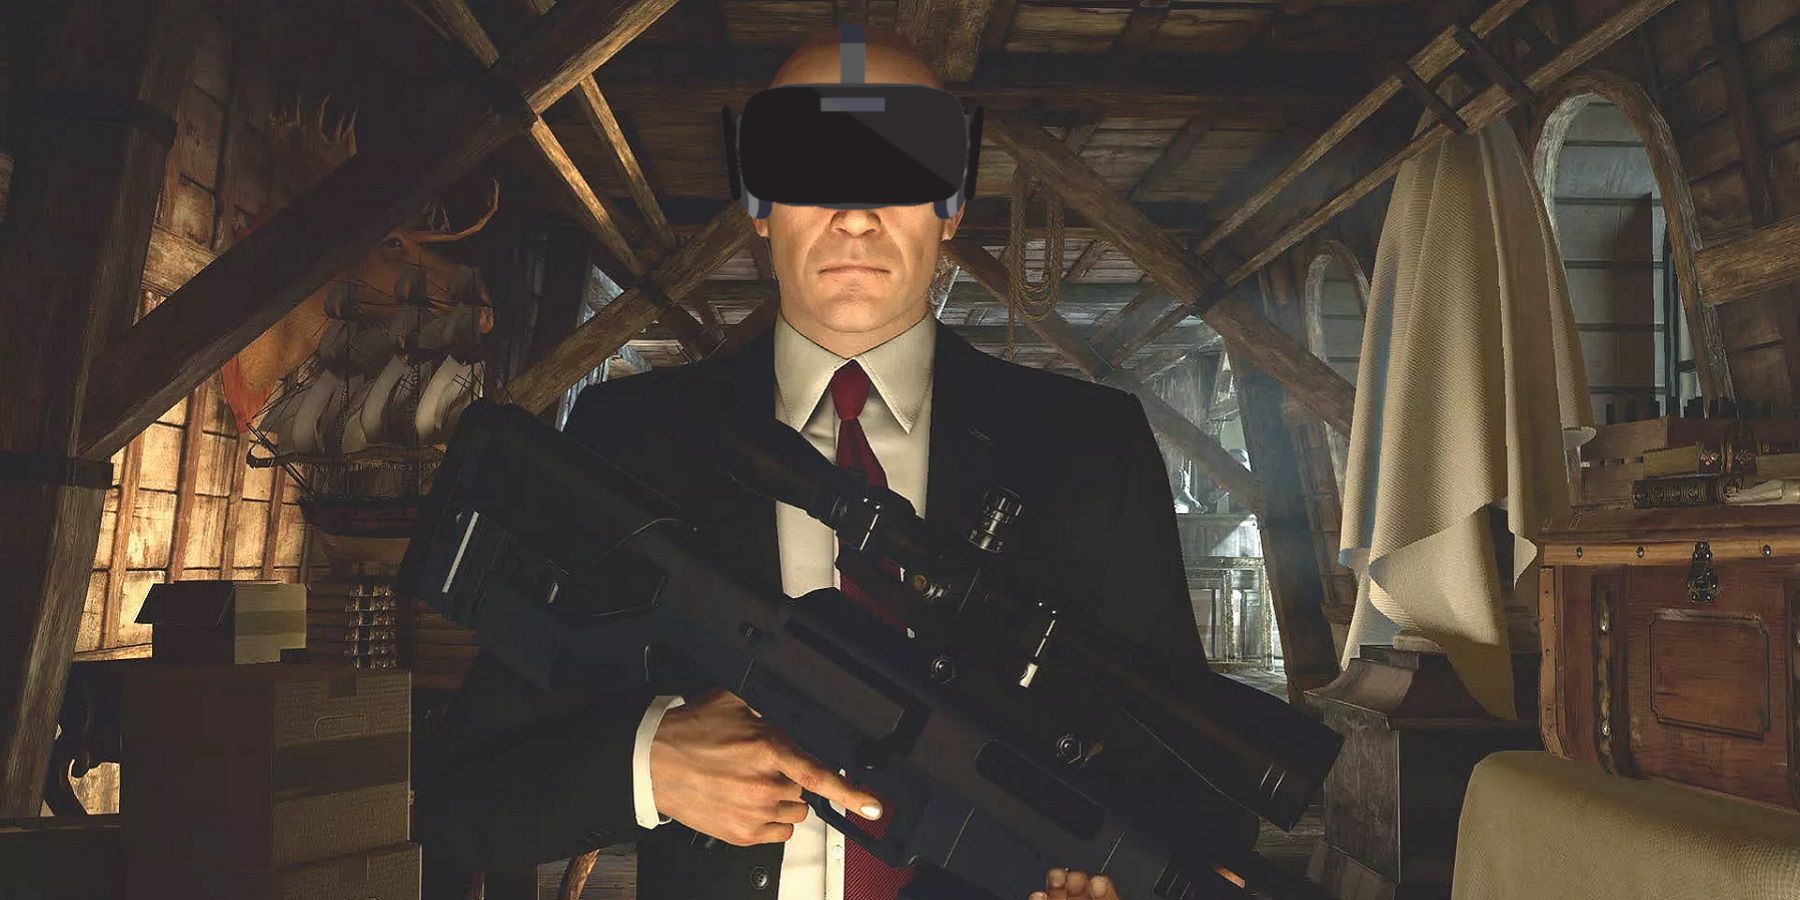 Image from Hitman 3 showing Agent 47 holding a sniper rifle and wearing a generic VR headset.